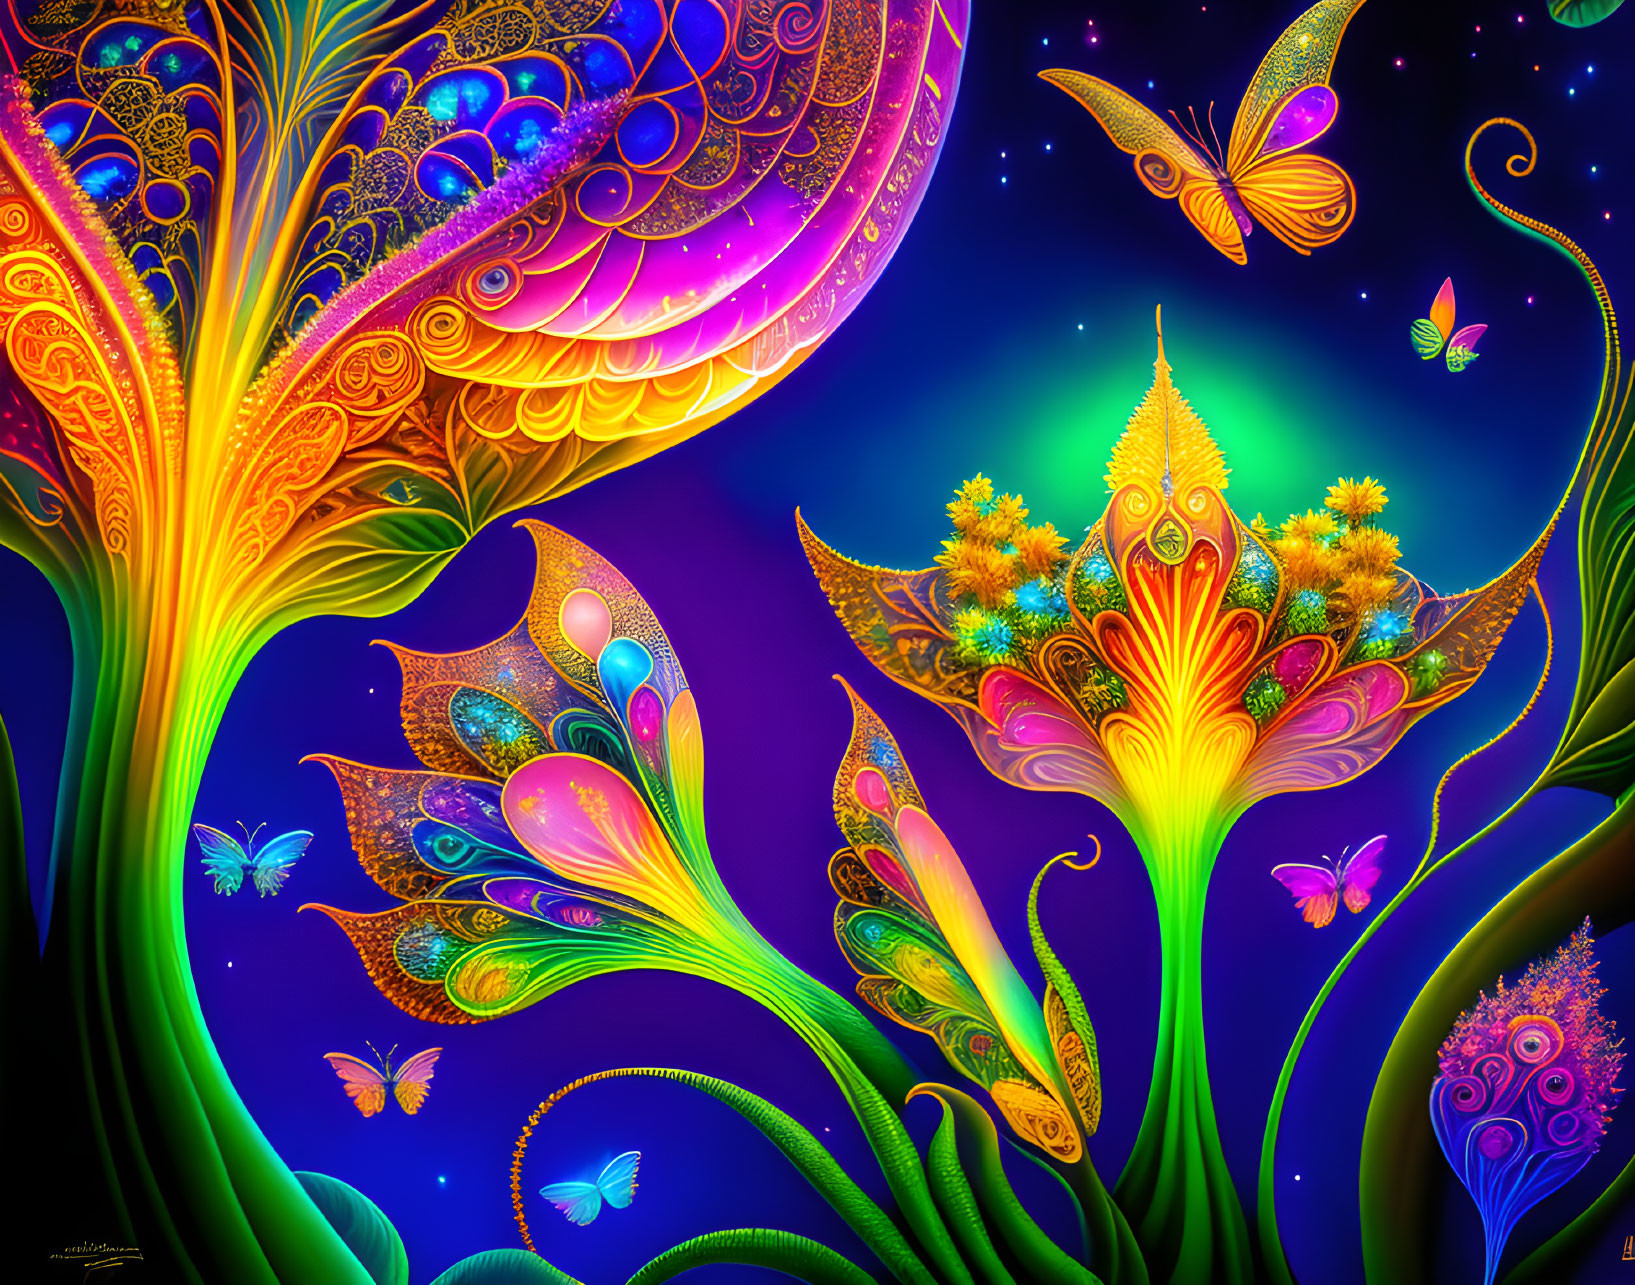 Colorful digital artwork of whimsical neon-lit fantasy landscape with stylized nature elements on dark backdrop